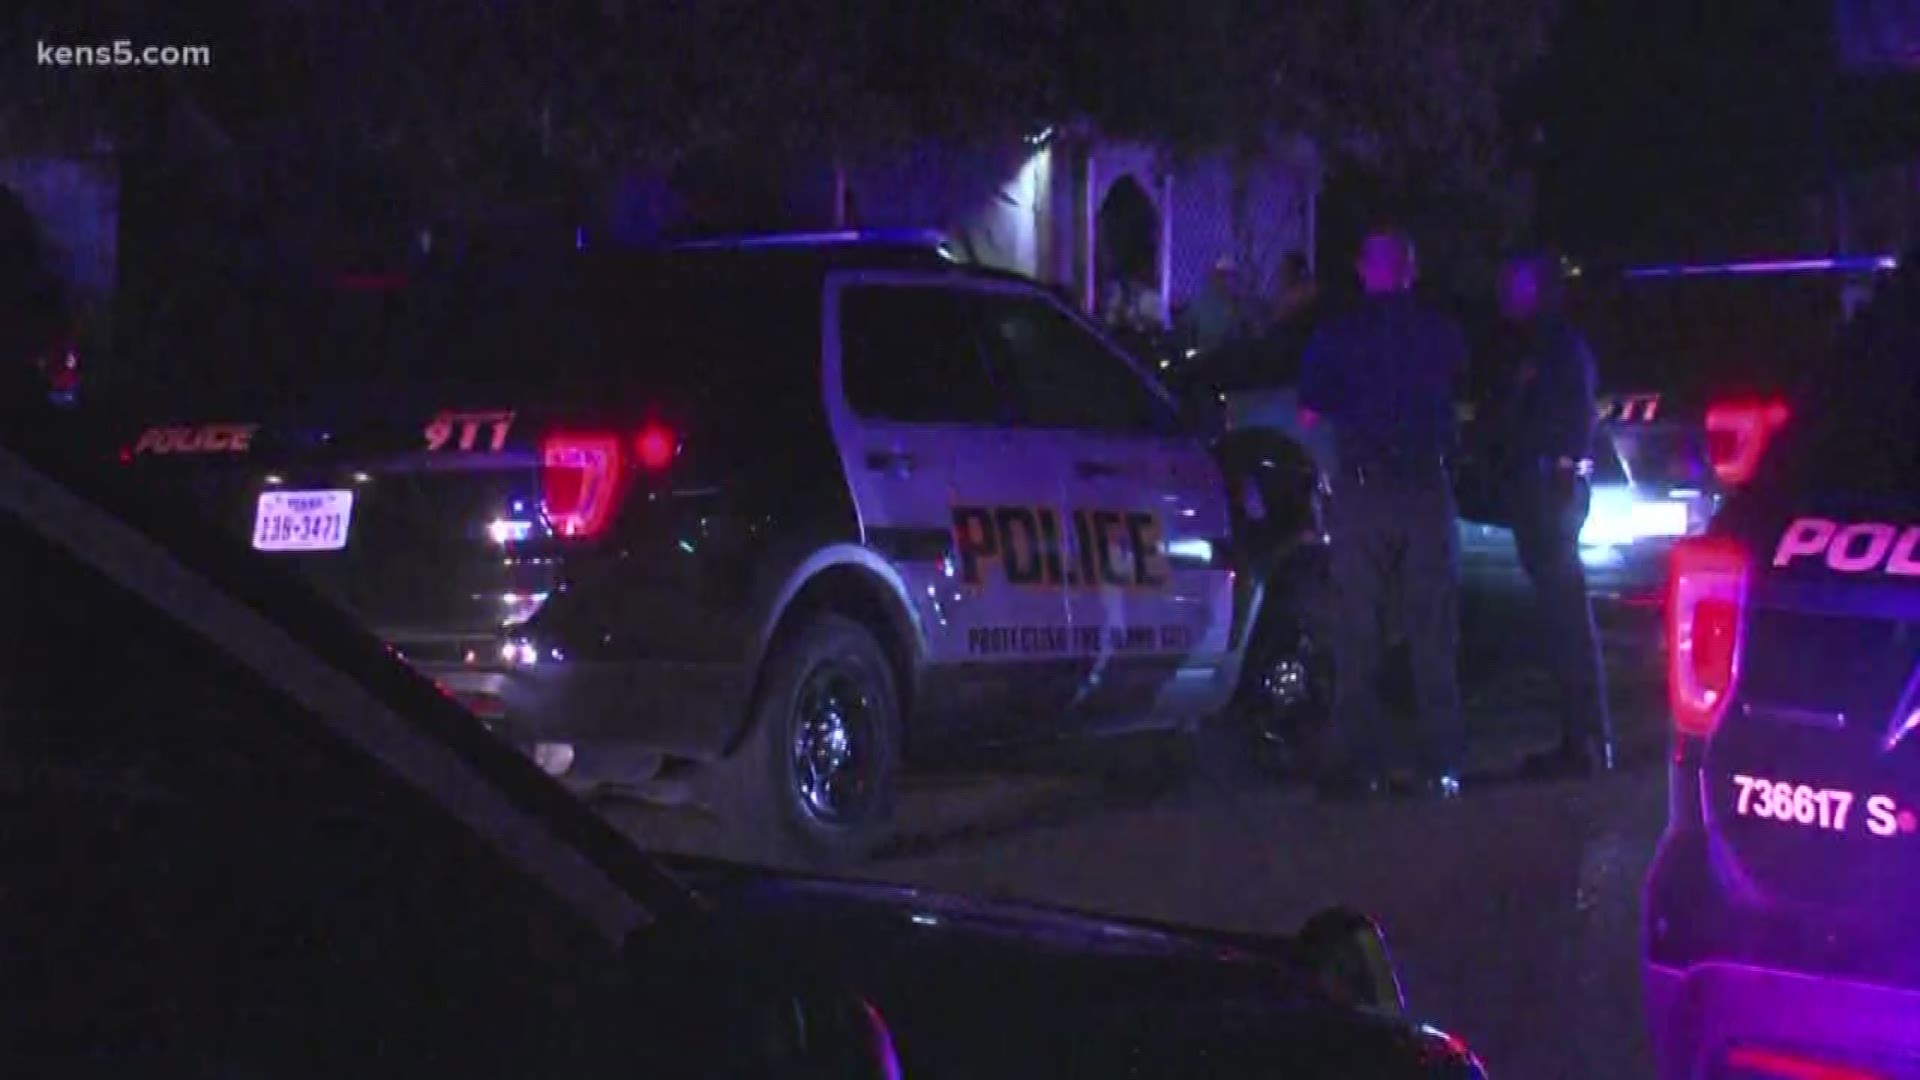 A mother watched her 15-year-old son die after he was shot overnight on the city's south side, according to the San Antonio police.